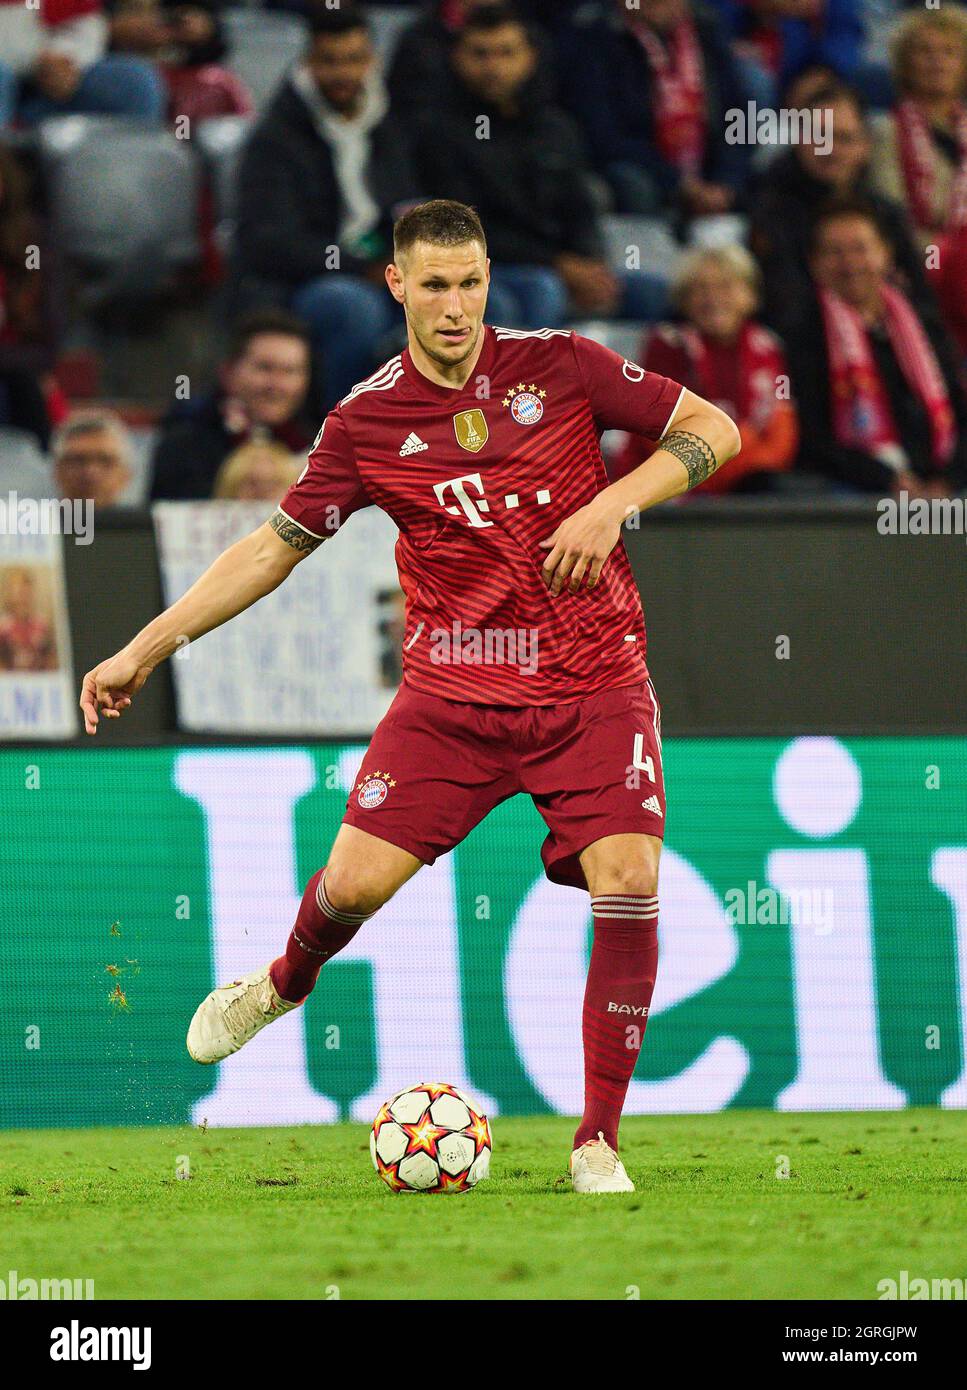 Niklas SUELE, SÜLE, FCB 4     in the match  FC BAYERN MUENCHEN - FC DYNAMO KIEW (Kyiv) 5-0 of football UEFA Champions League group stage in season 2021/2022 in Munich, September 29, 20201.   © Peter Schatz / Alamy Live News Stock Photo